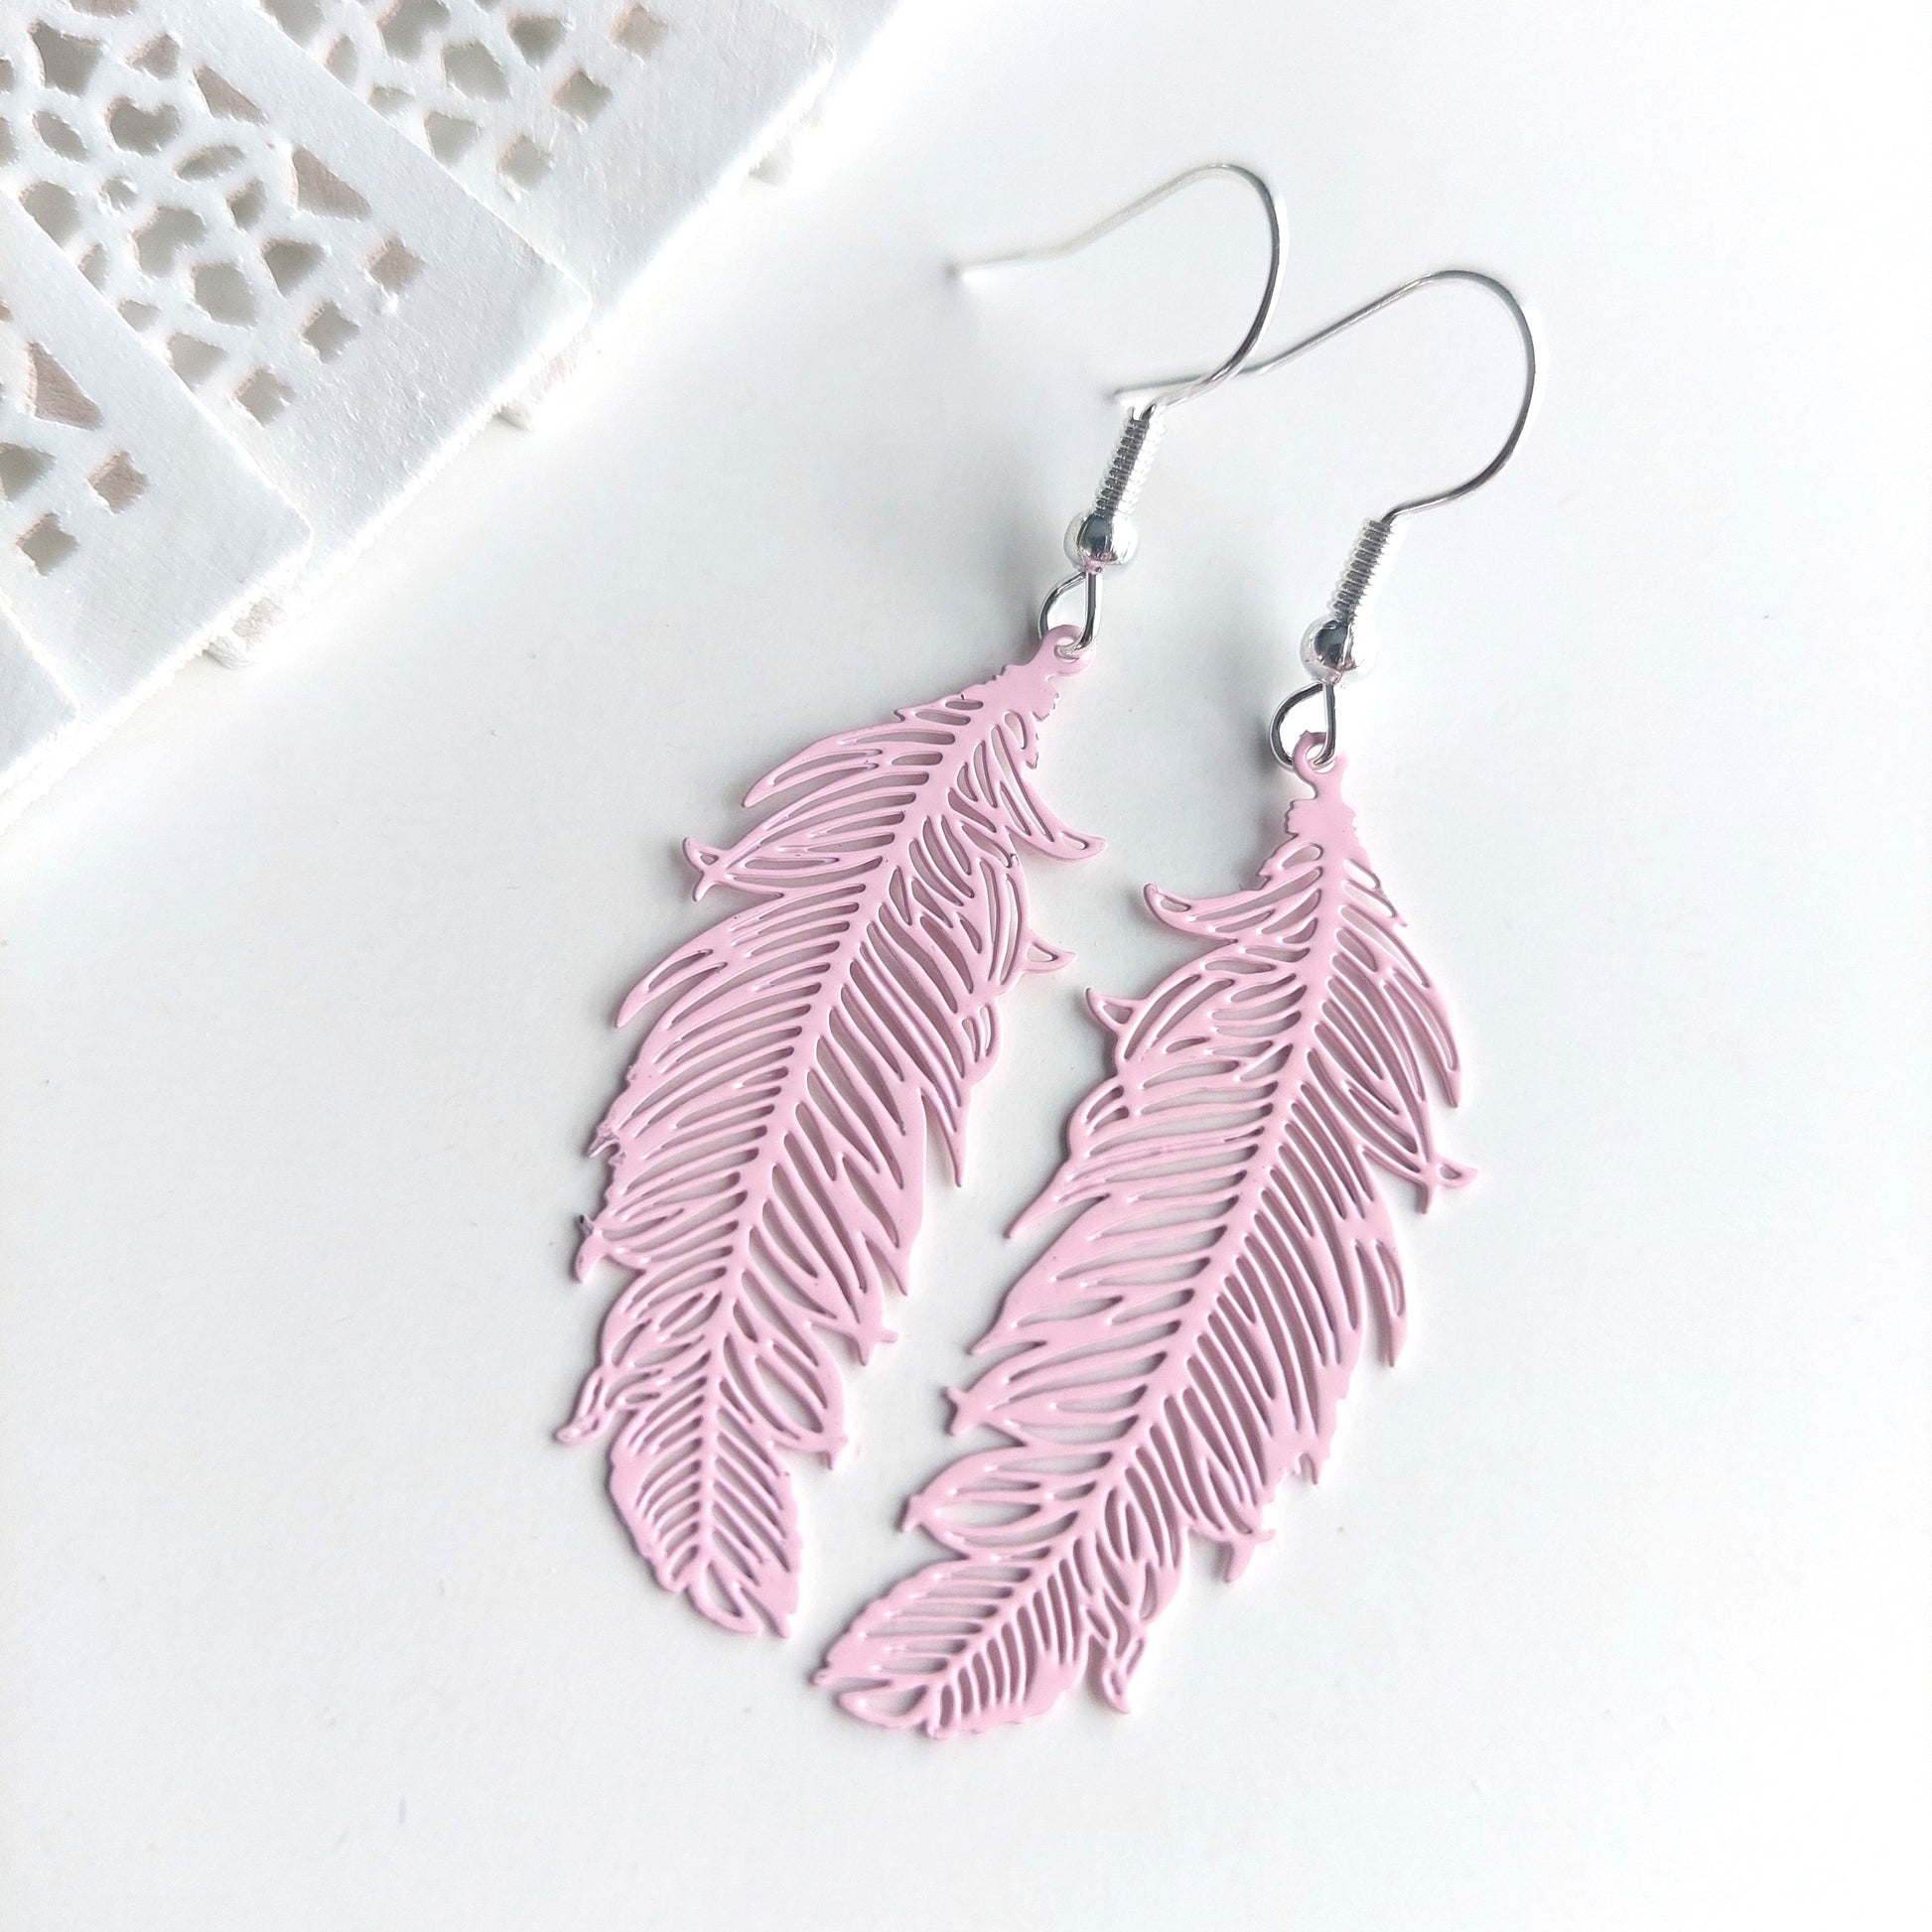 Dainty Feather Dangles Hypoallergenic Earrings for Sensitive Ears Made